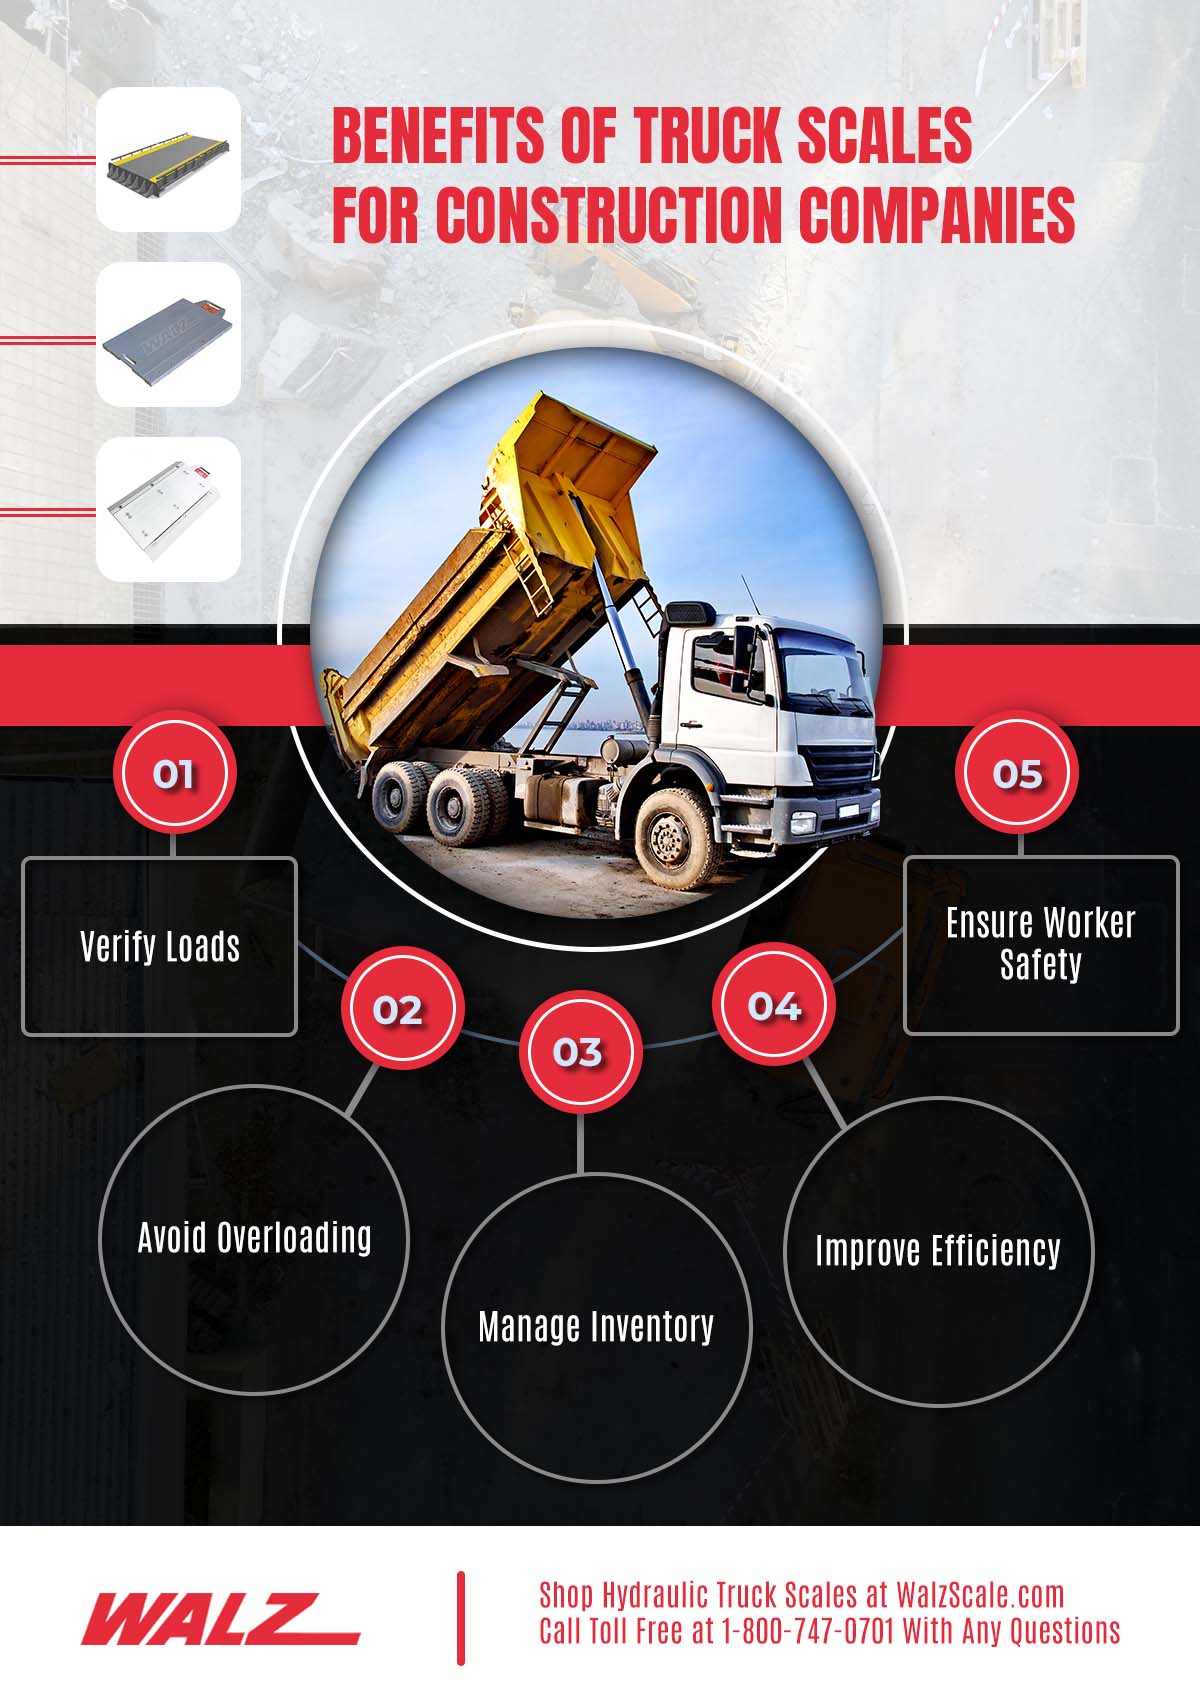 Benefits of Truck Scales for Construction Companies Infographic